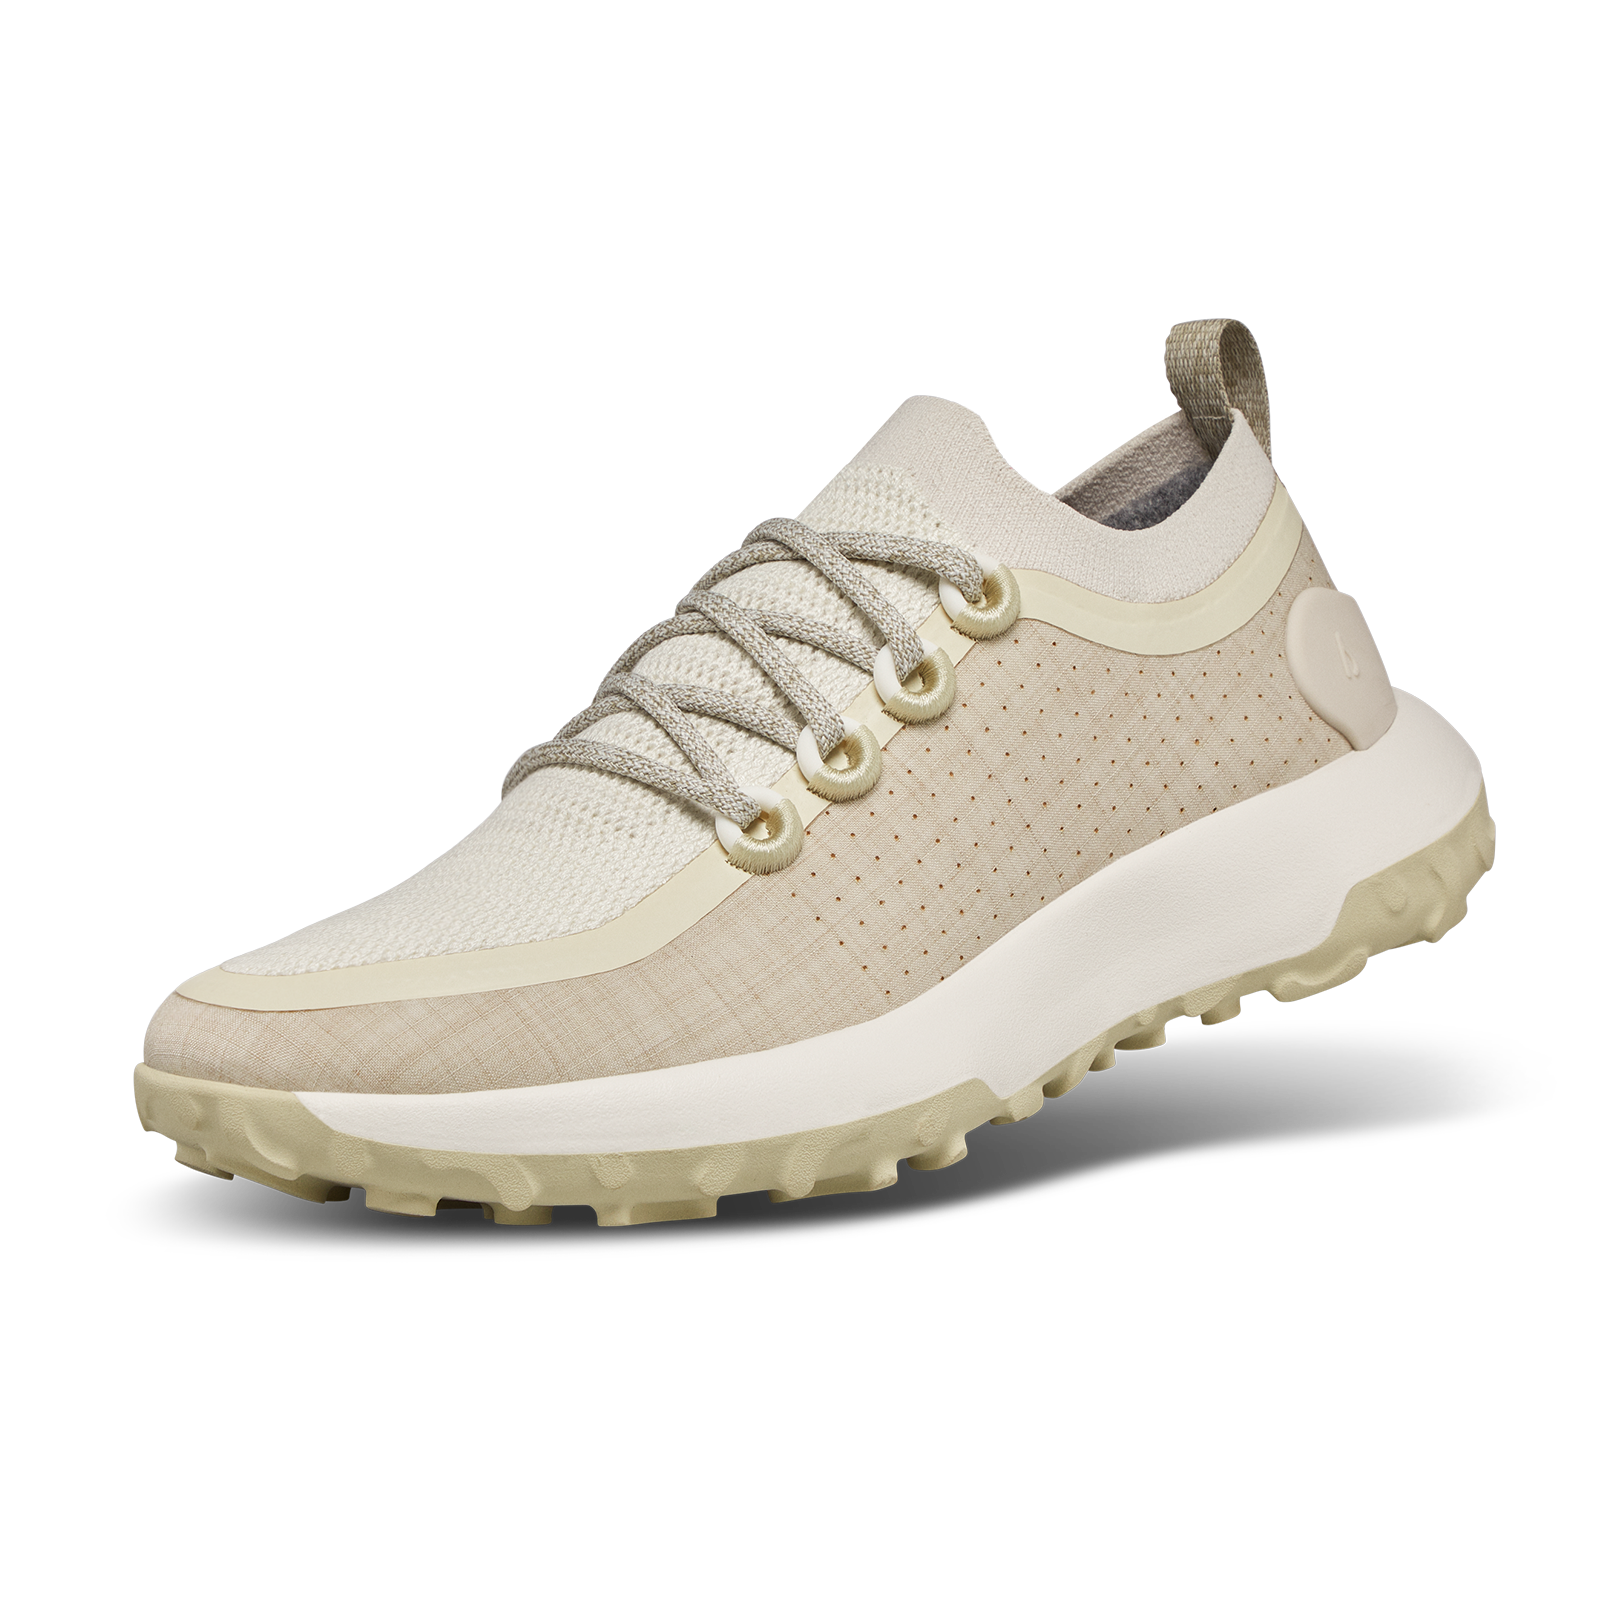 Women's Trail Runners SWT - Natural White (Cream Sole)